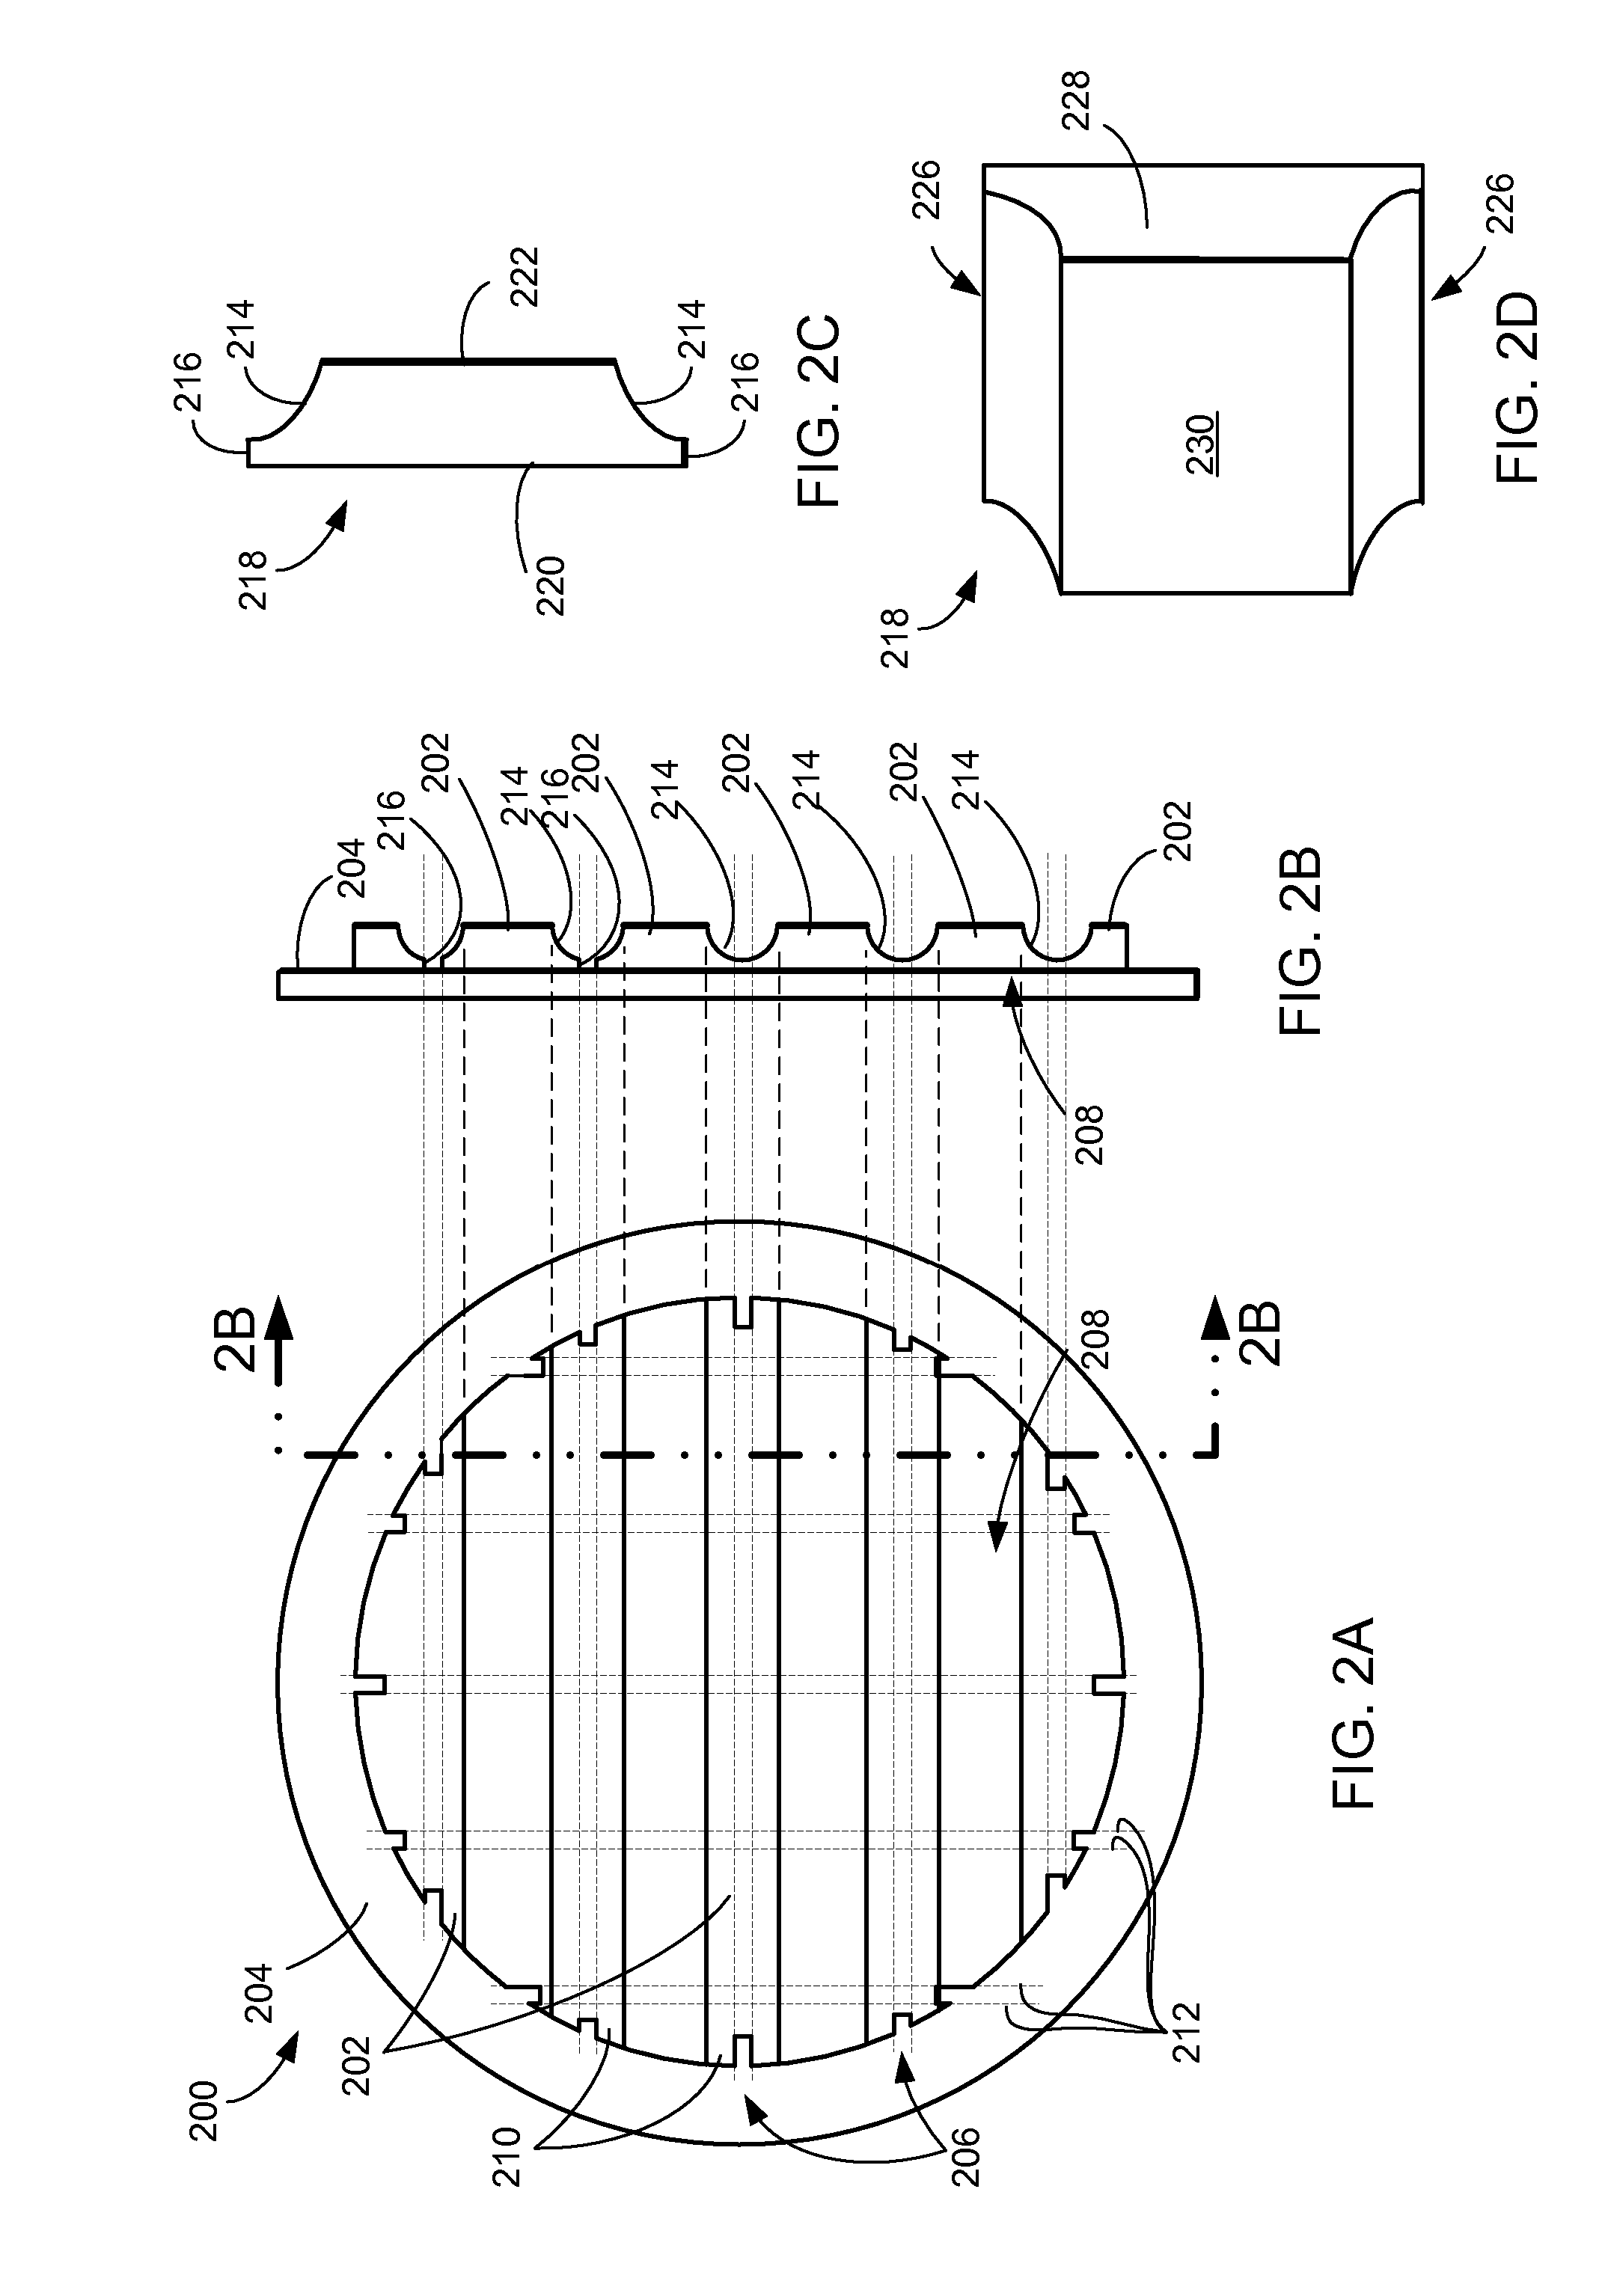 Integrated circuit package system with arched pedestal